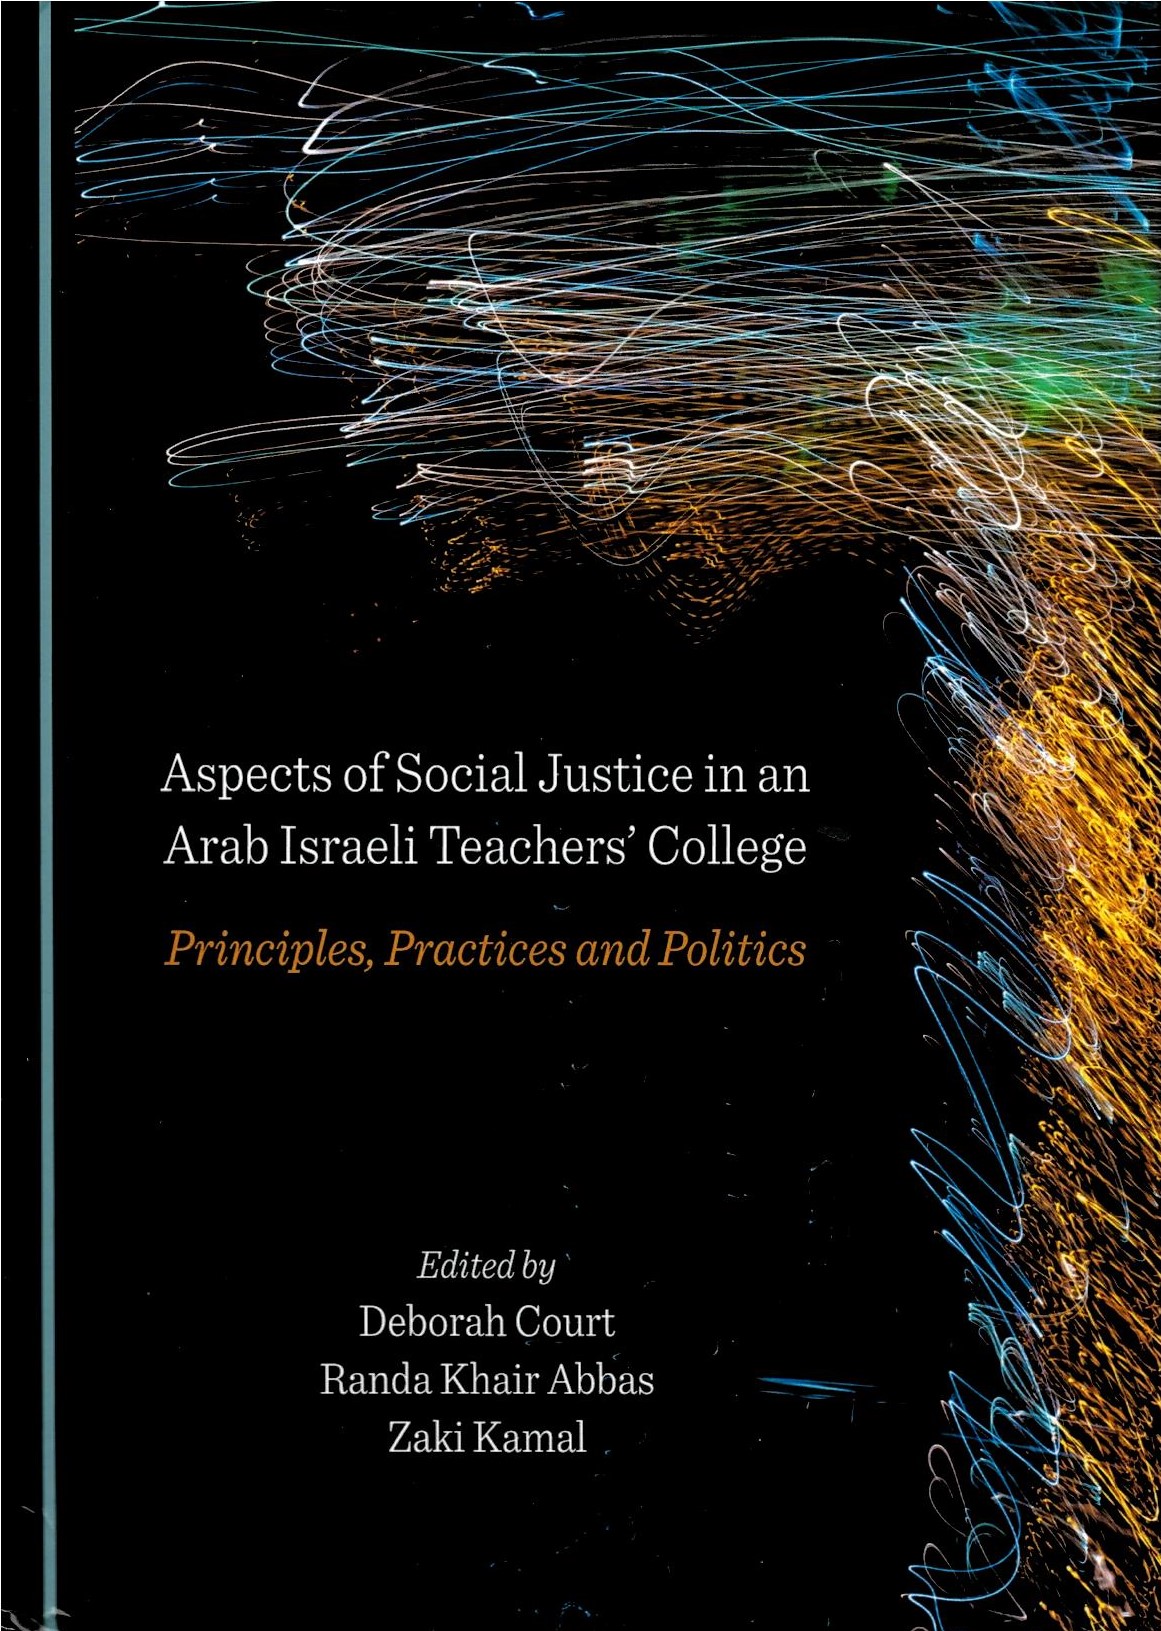 Court, Deborah, editor-  	Aspects of social justice in an Arab Israeli teachers' college: principles, practices and politics